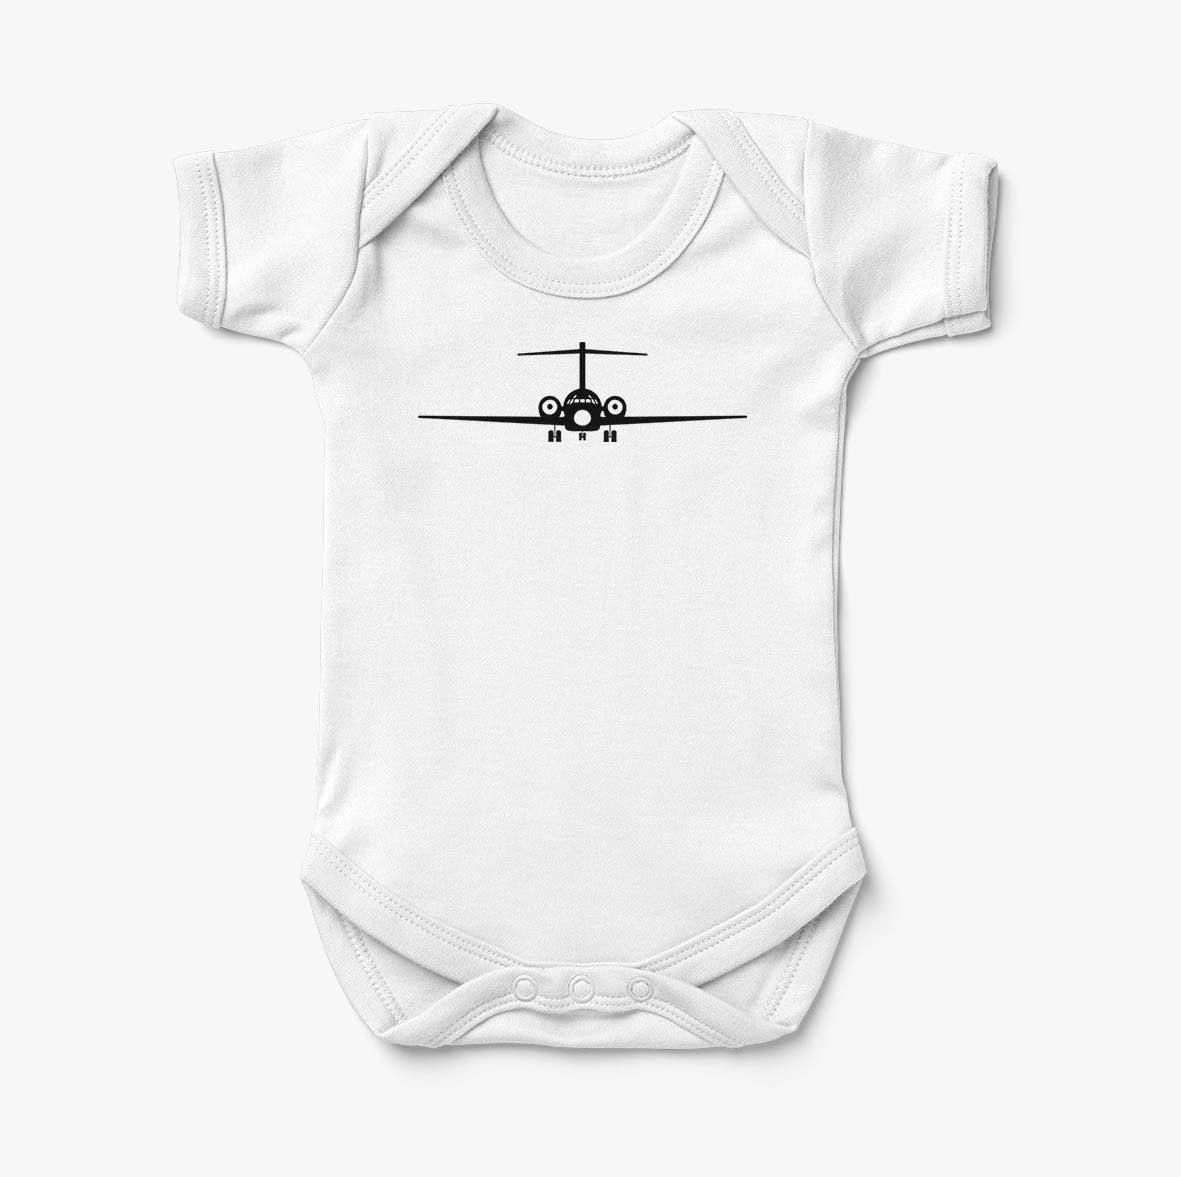 Boeing 727 Silhouette Designed Baby Bodysuits